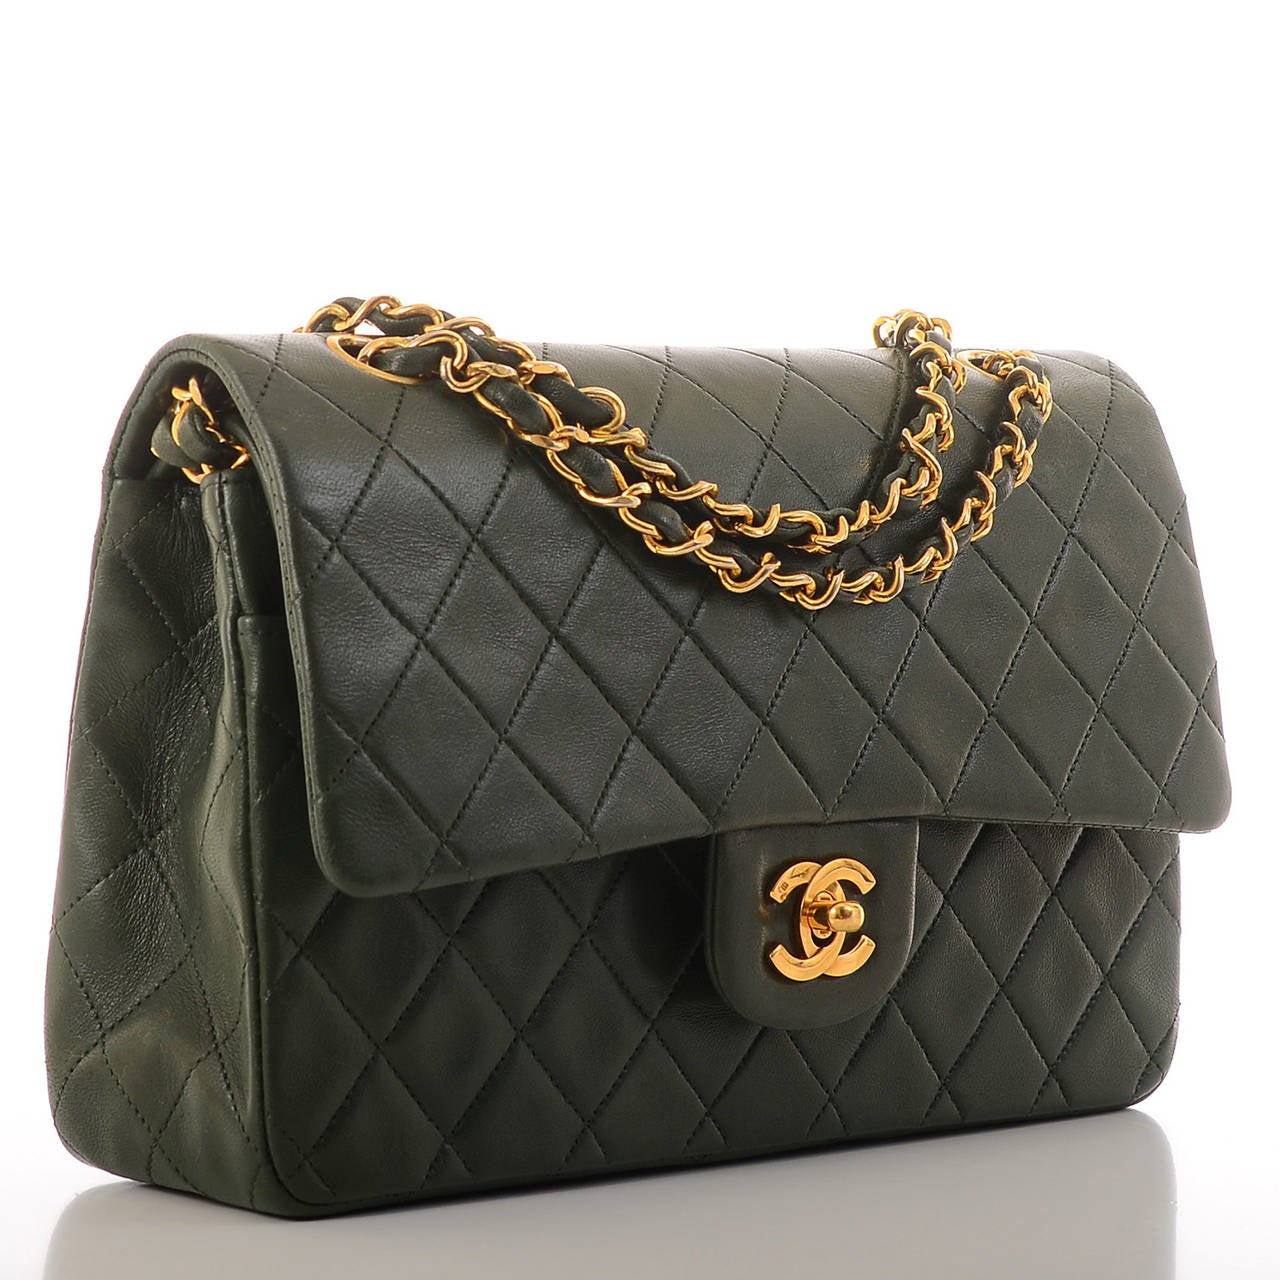 Chanel forest green Large Classic 2.55 double flap bag of quilted lambskin leather with gold tone hardware.

Named 2.55 to honor the bag's creation in February 1955, the iconic Chanel bag was a modification of the bag Coco Chanel originally